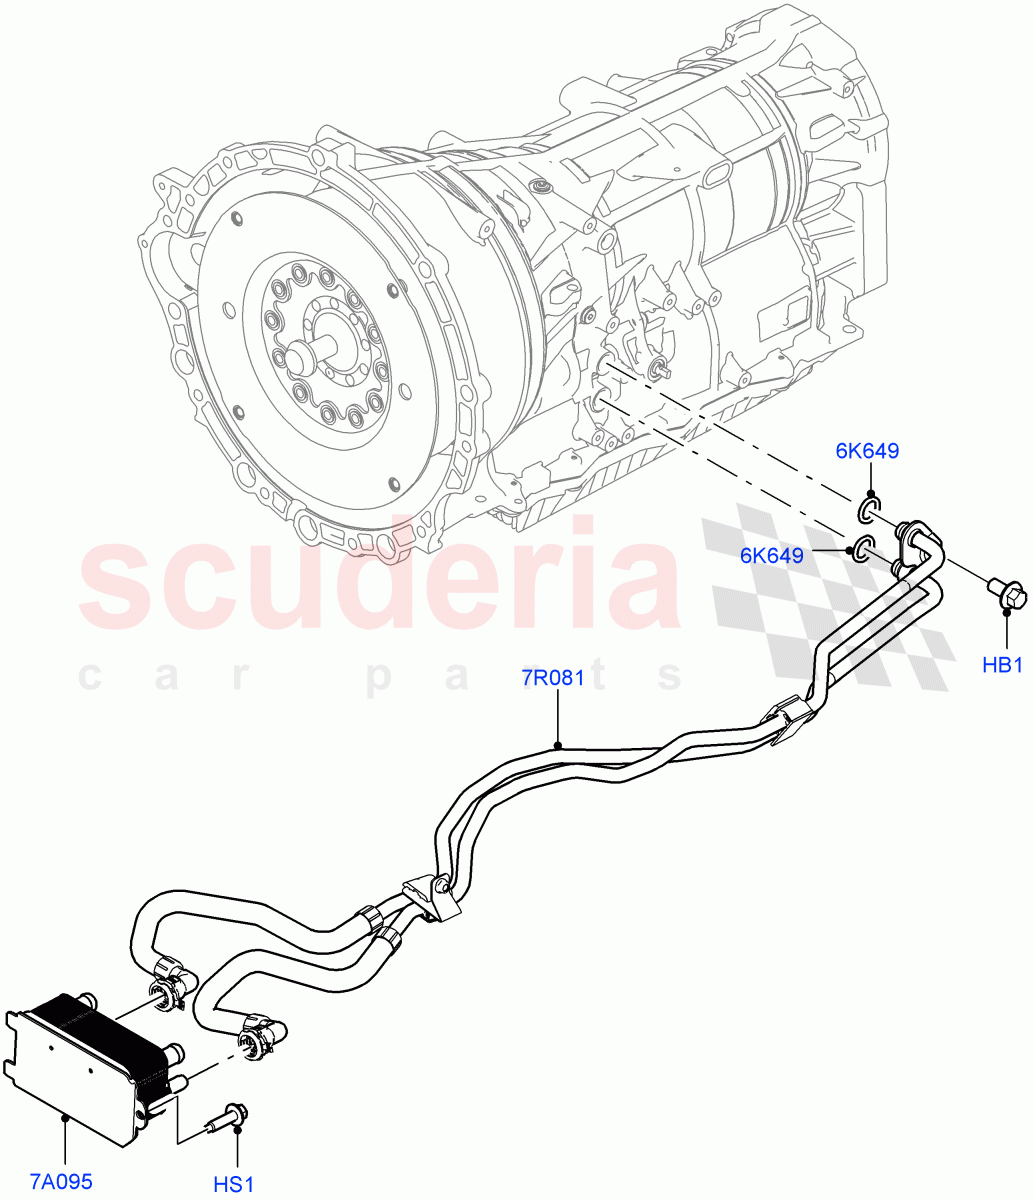 Transmission Cooling Systems(Solihull Plant Build)(2.0L I4 High DOHC AJ200 Petrol,8 Speed Auto Trans ZF 8HP45)((V)FROMJA000001) of Land Rover Land Rover Range Rover Sport (2014+) [2.0 Turbo Petrol GTDI]